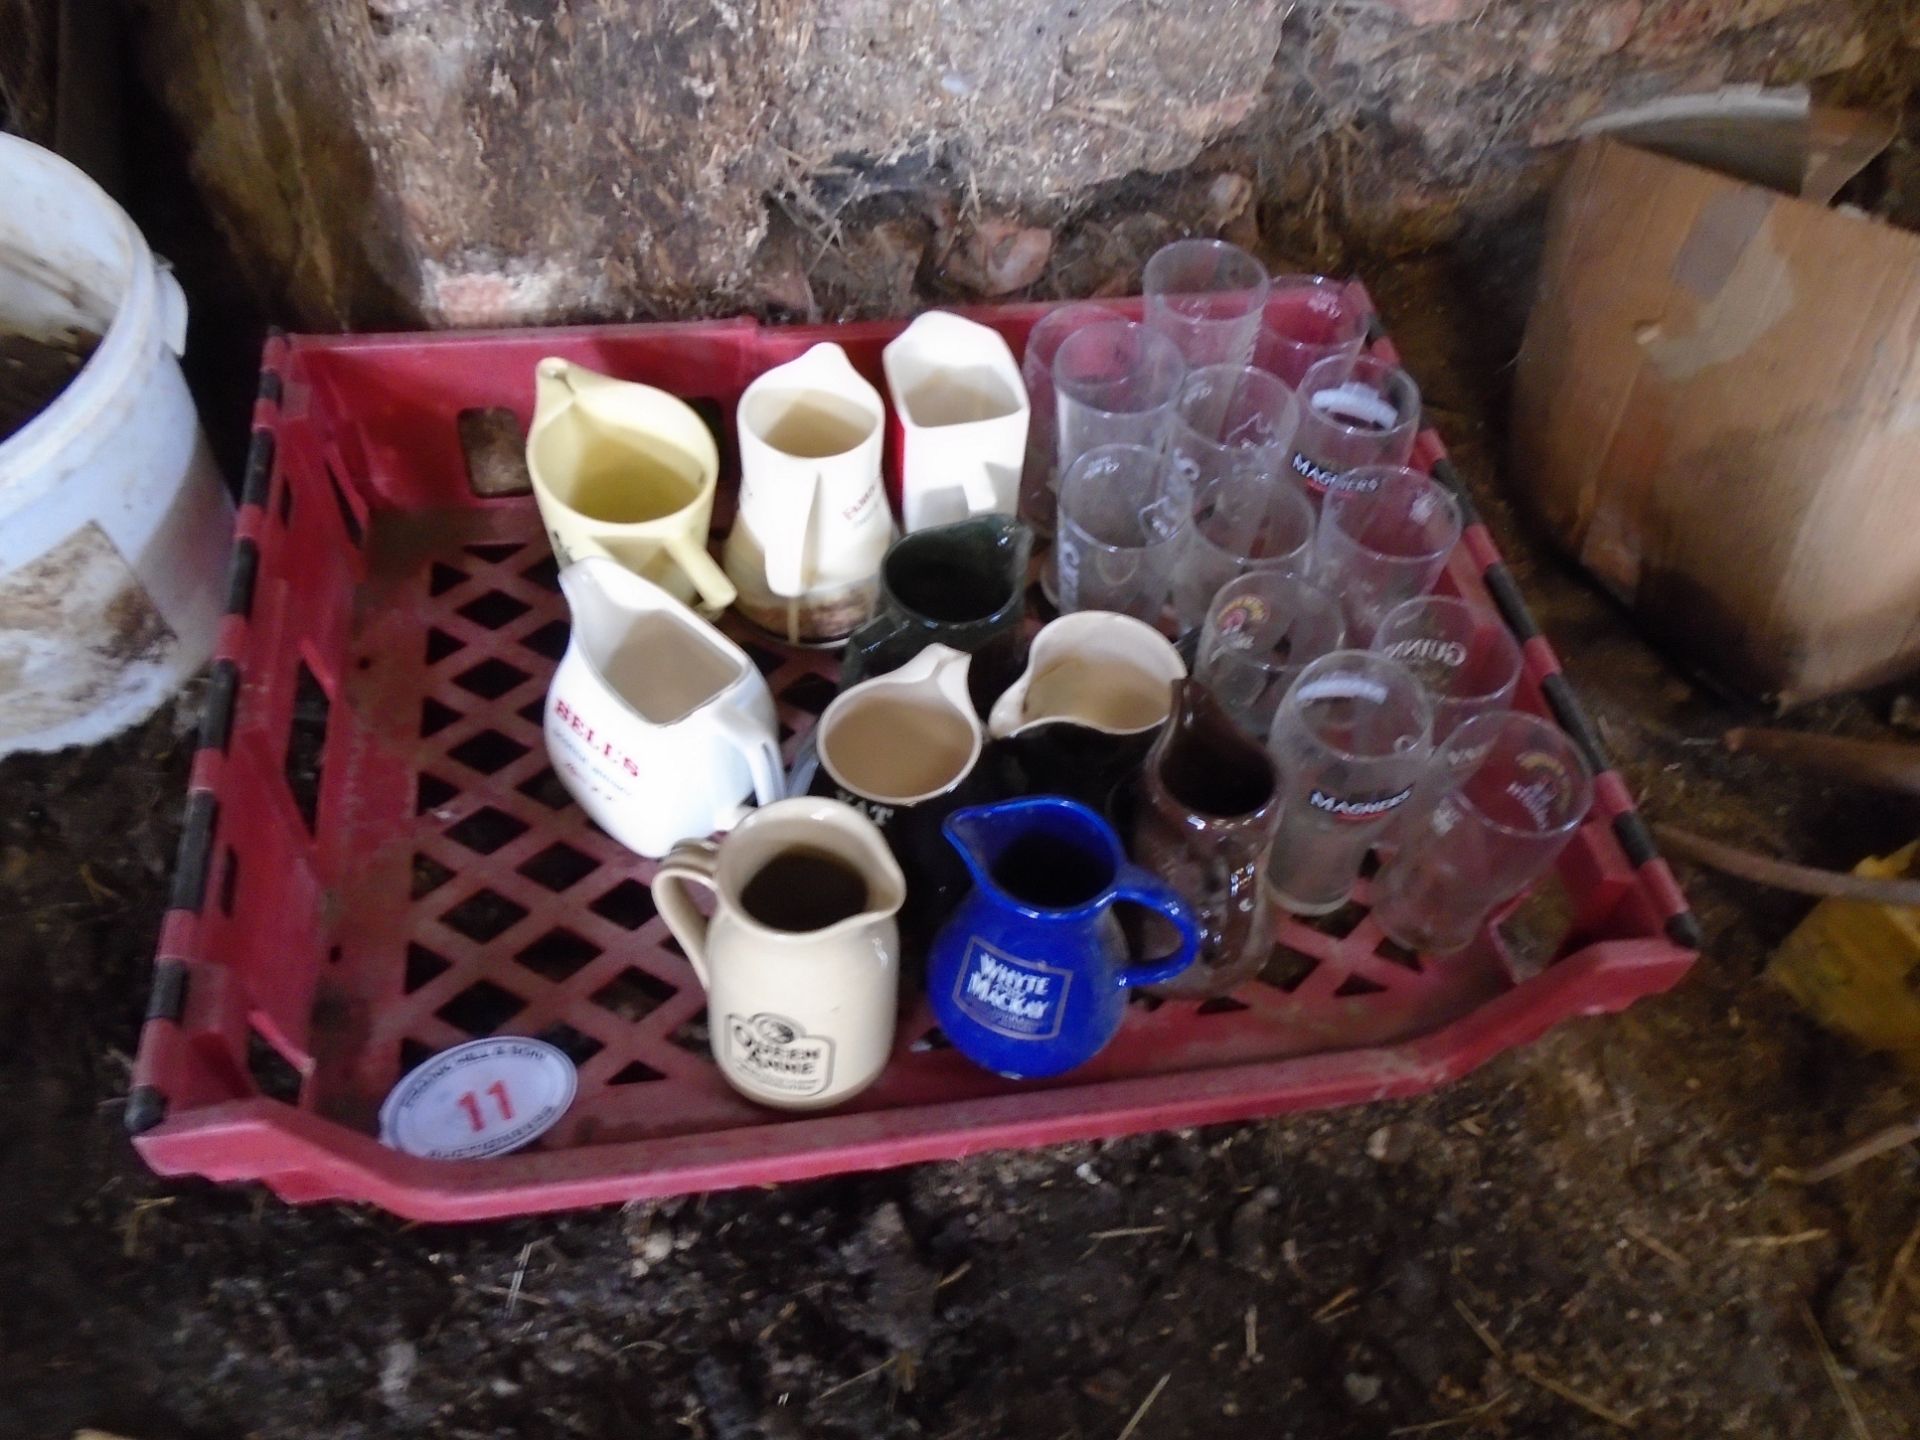 Tray of branded jugs & glasses